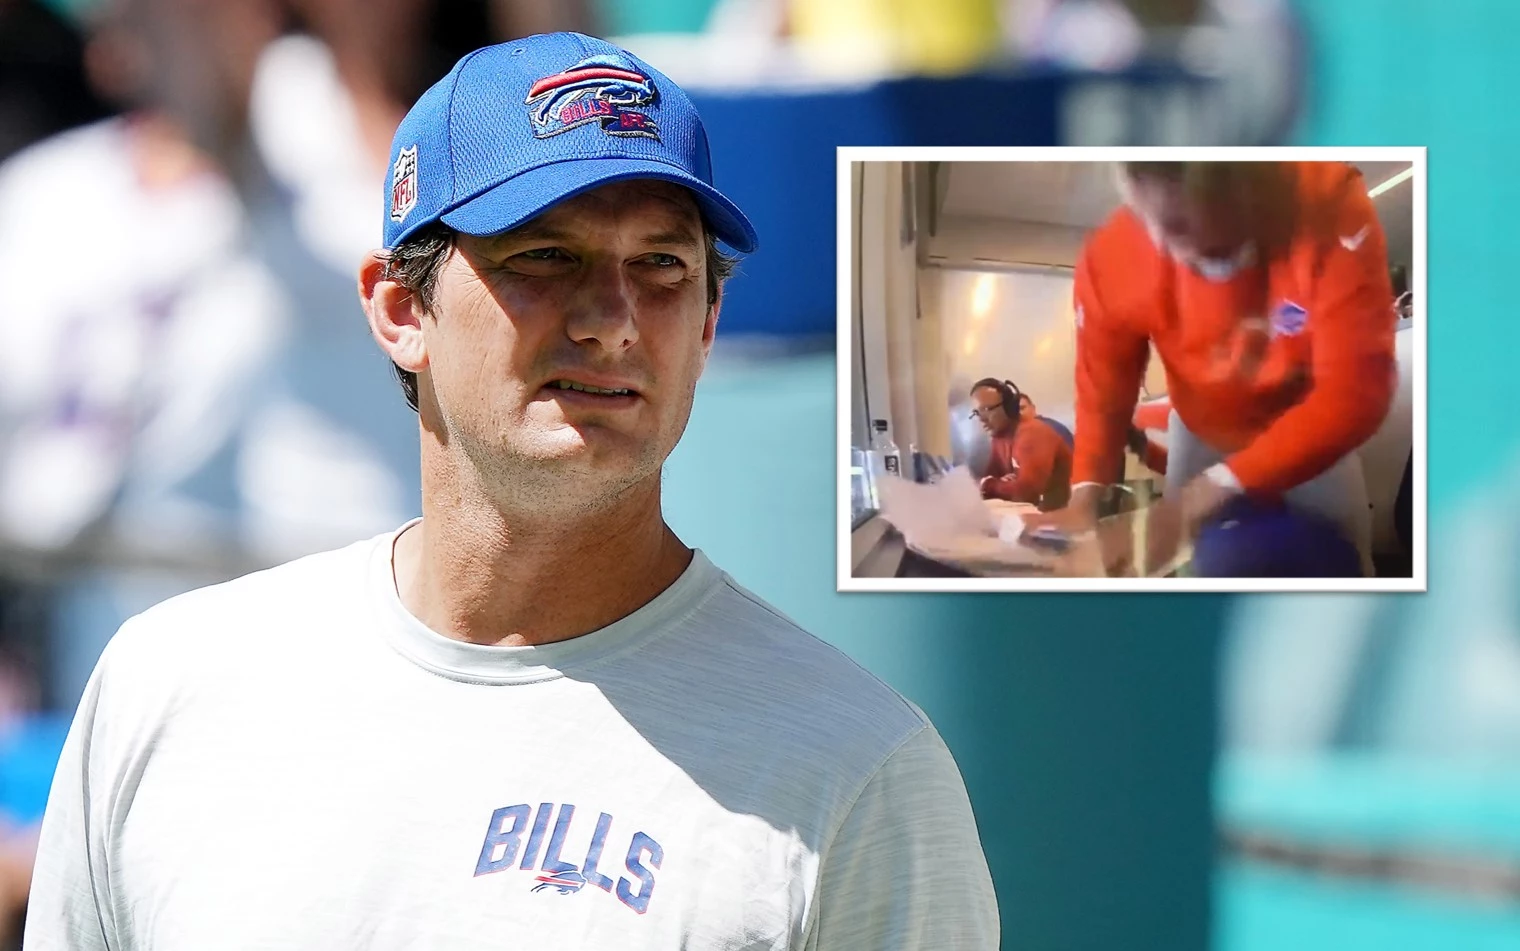 NFL Fans Mock Buffalo Bills' Coach for Unhinged Moment After Loss